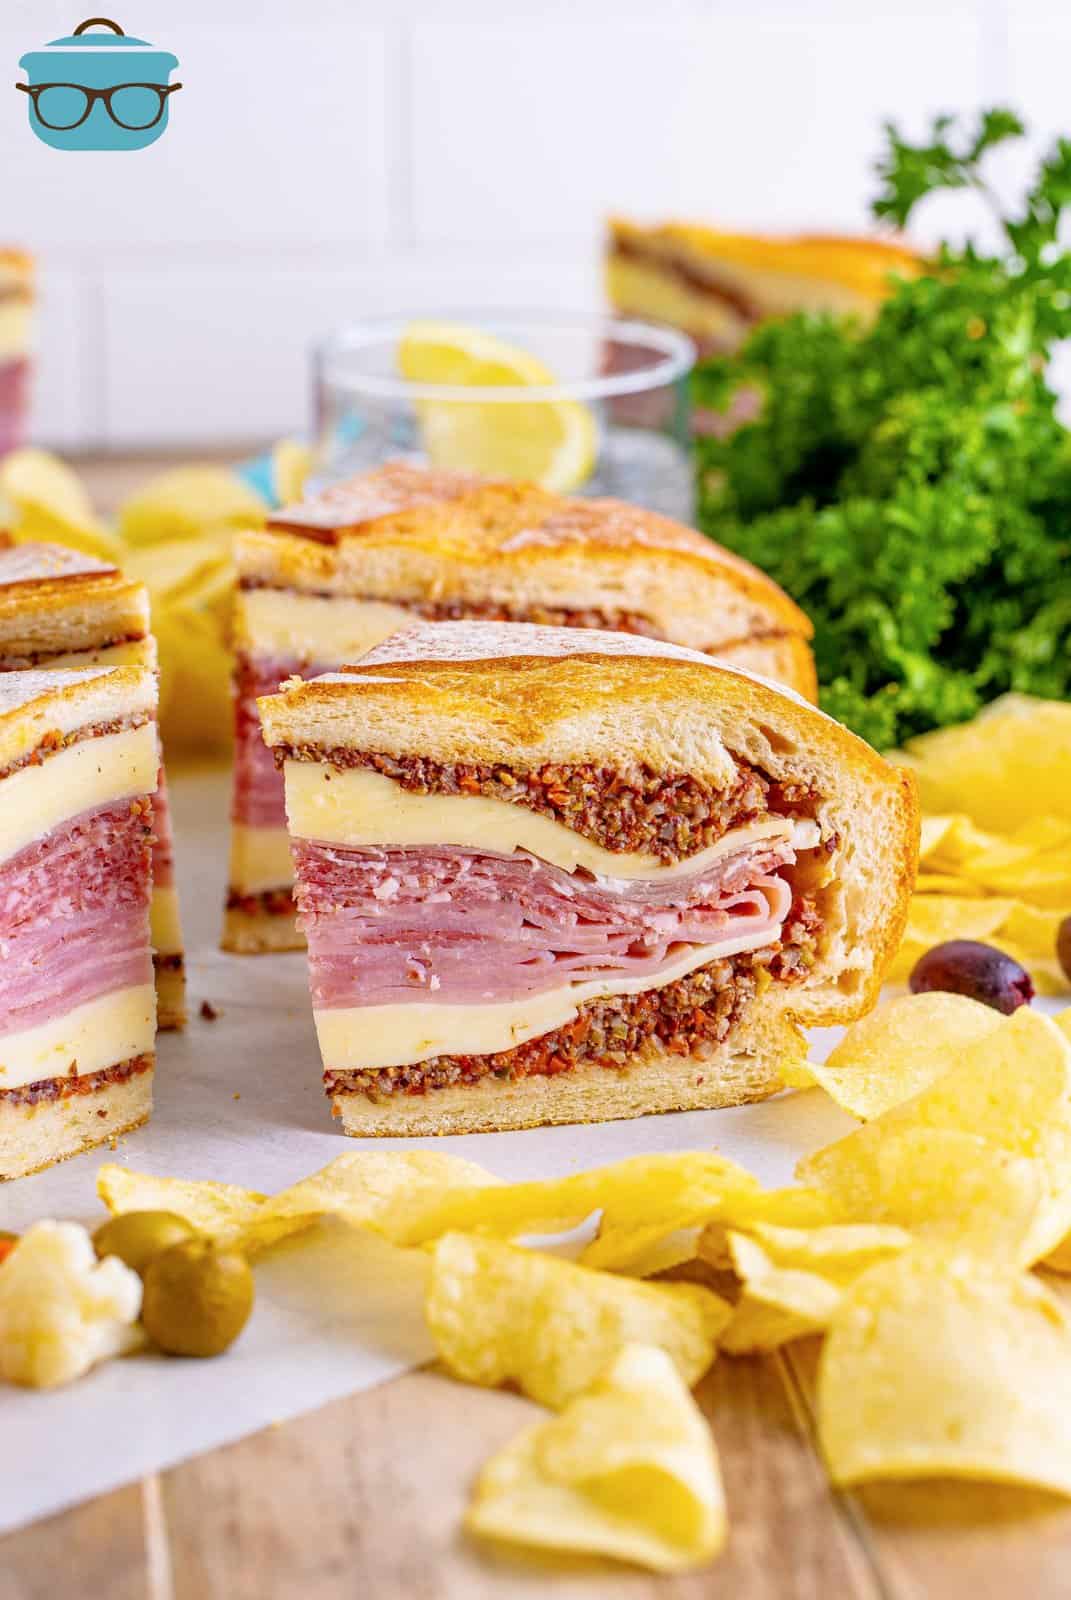 Slice of the Muffaletta Sandwich with chips in front showing layers.